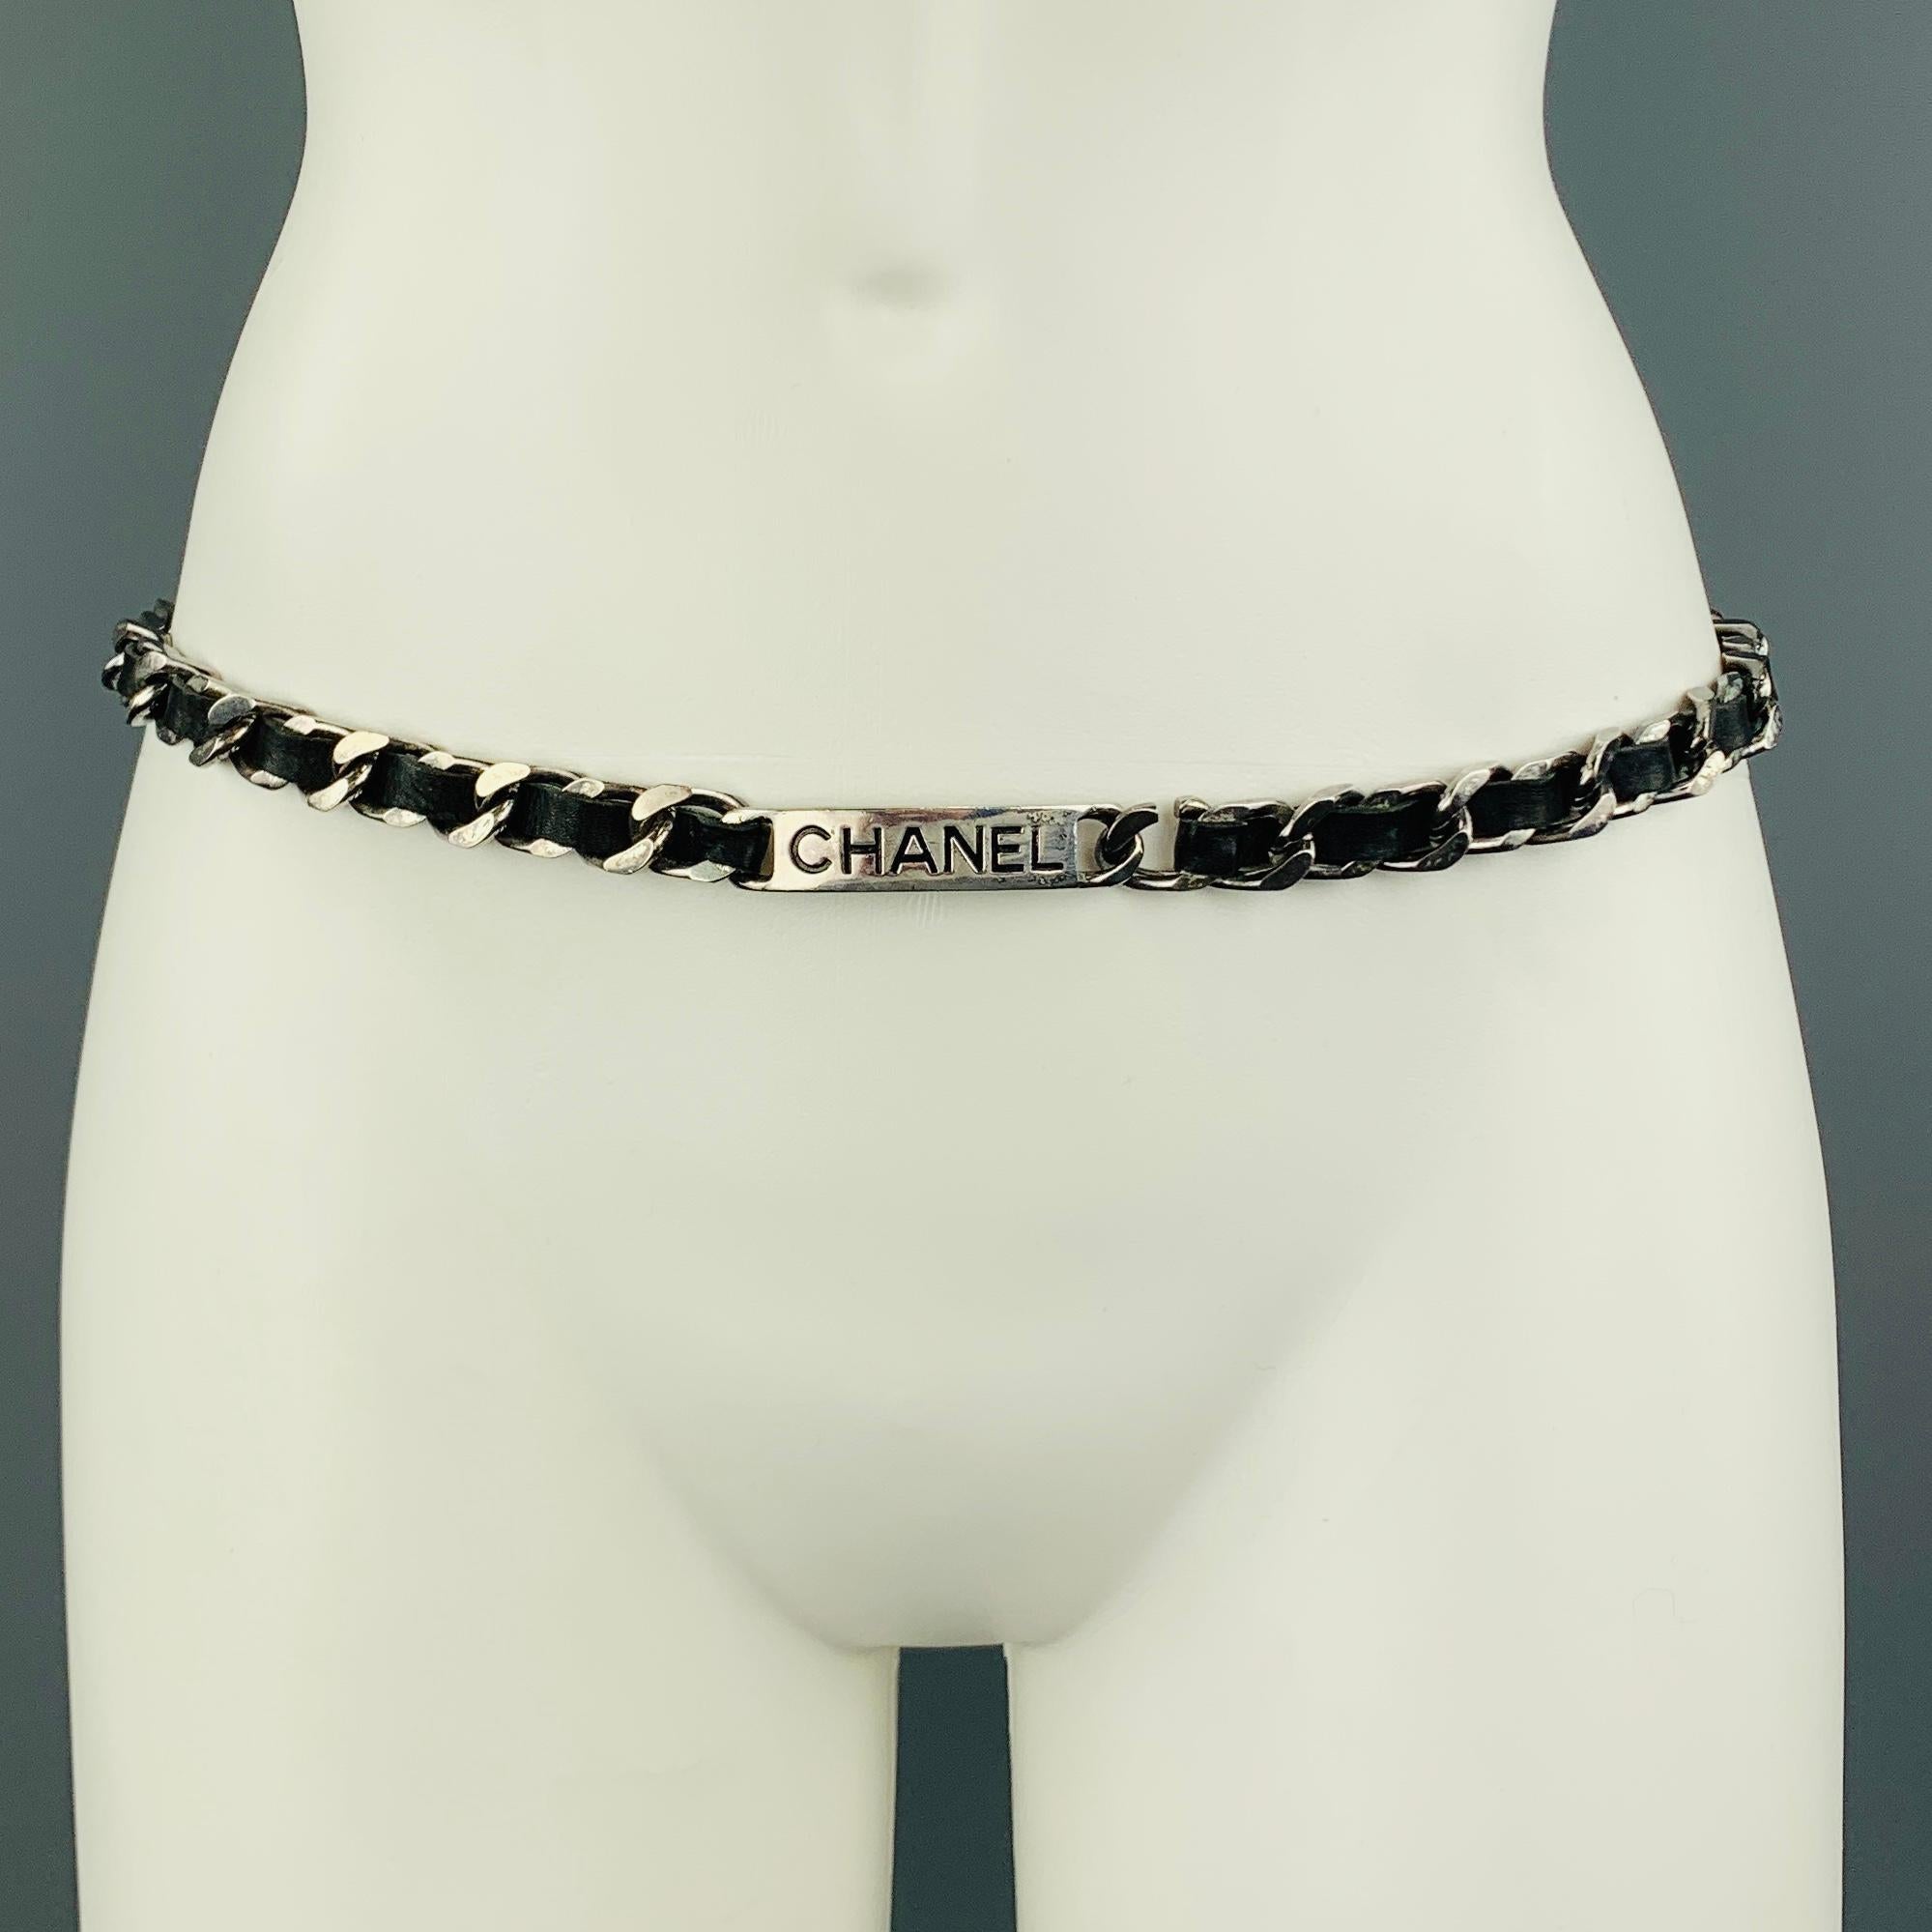 Vintage CHANEL circa Spring Summer 1996 belt comes in antique silver tone metal and features a thick curb chain strap with black woven leather and label embossed plaque.  Made in France.
 
Good Pre-Owned Condition.
Marked: 96 P
 
Length: 32